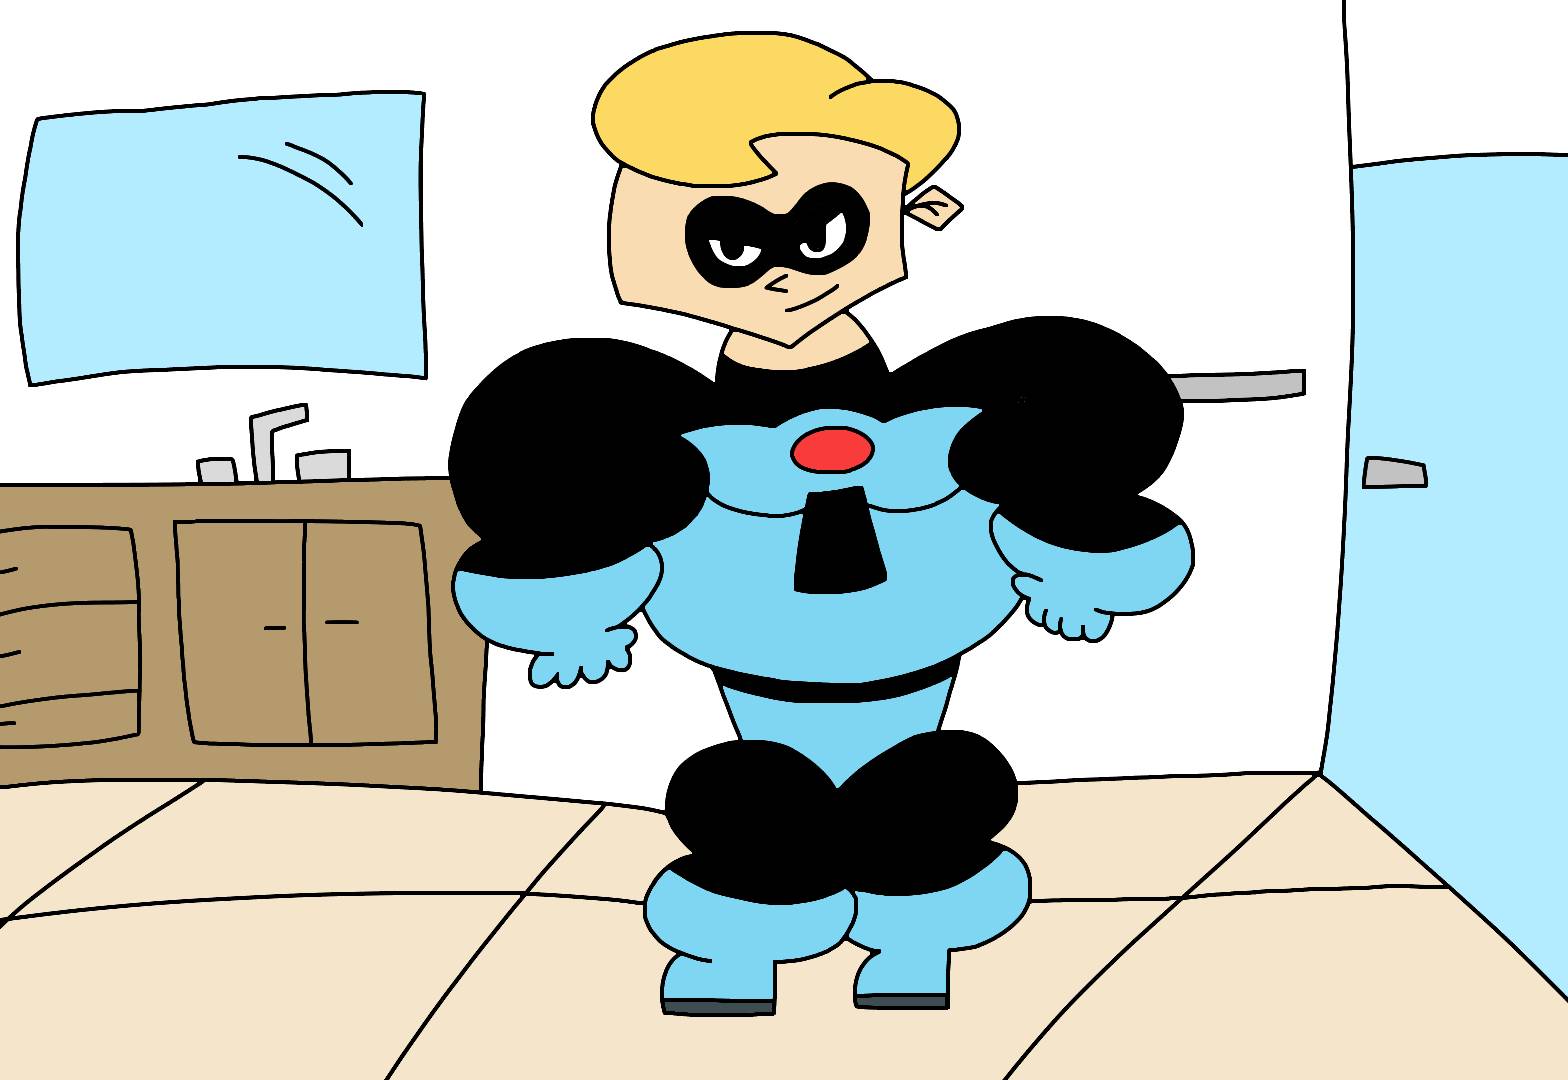 My Second Mr Incredible Meme Ever by Tomas1401 on DeviantArt